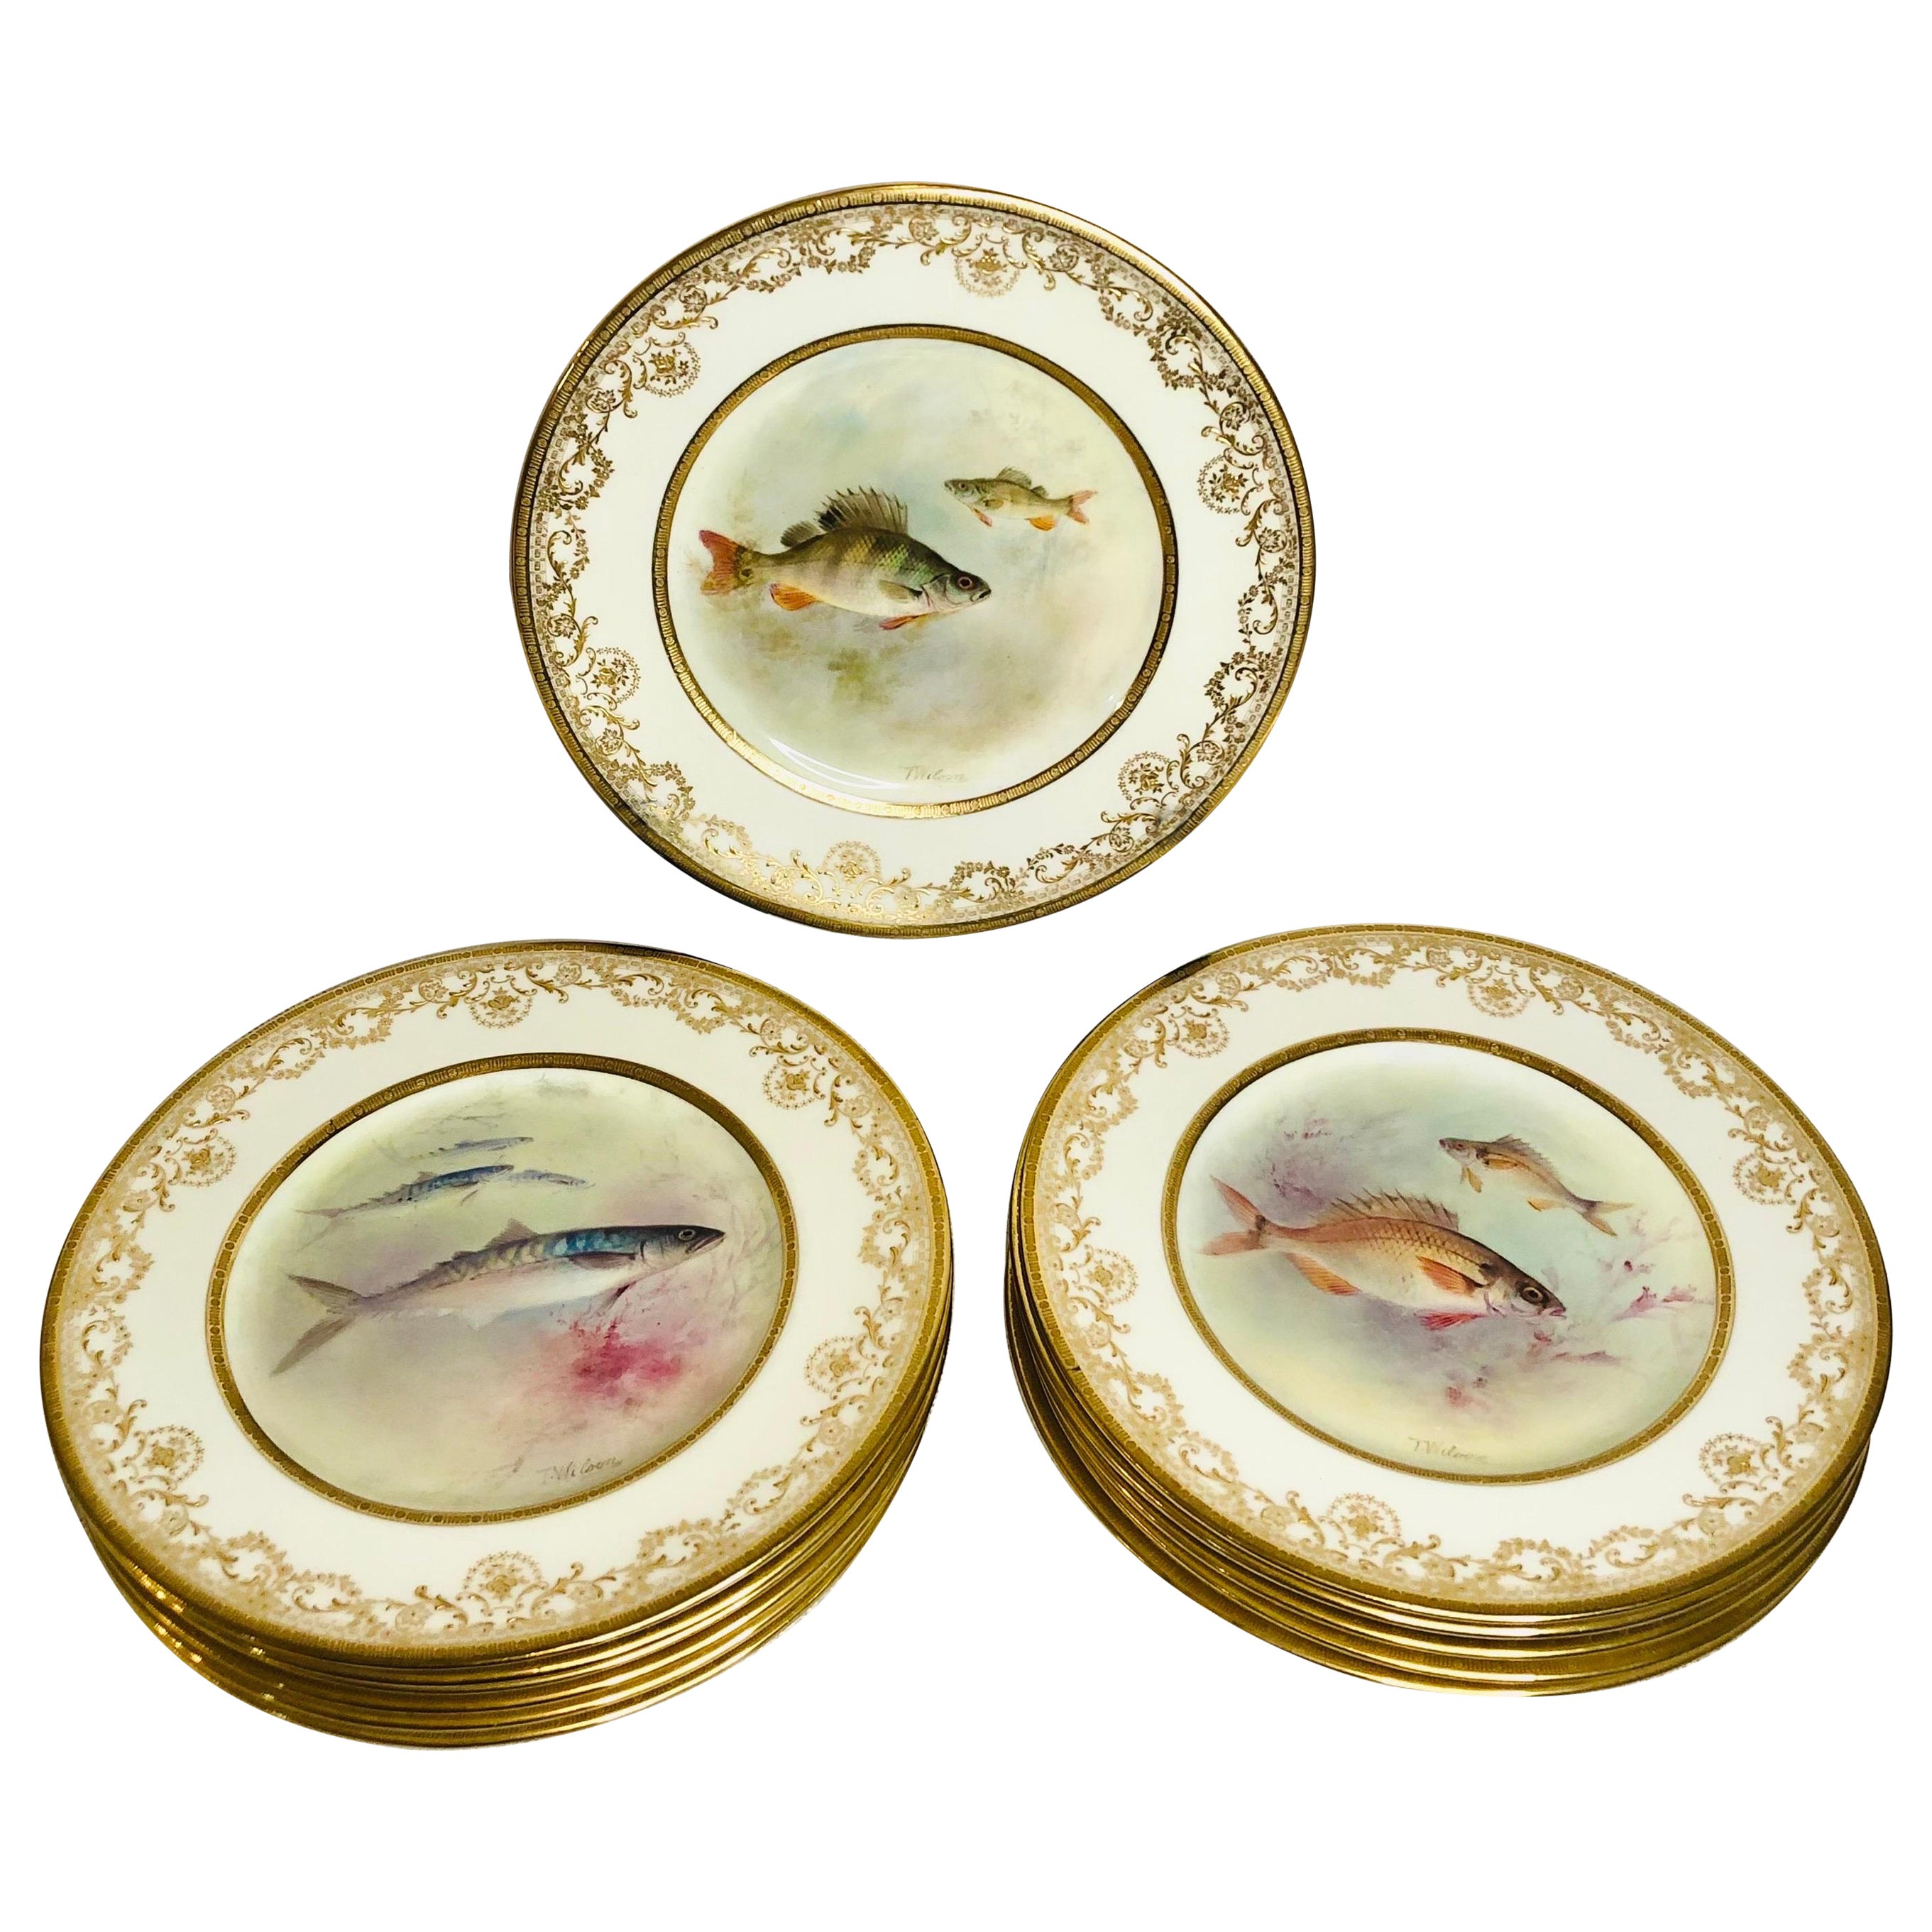 Set of 12 Royal Doulton Fish Plates Each Hand Painted with Different Fish 